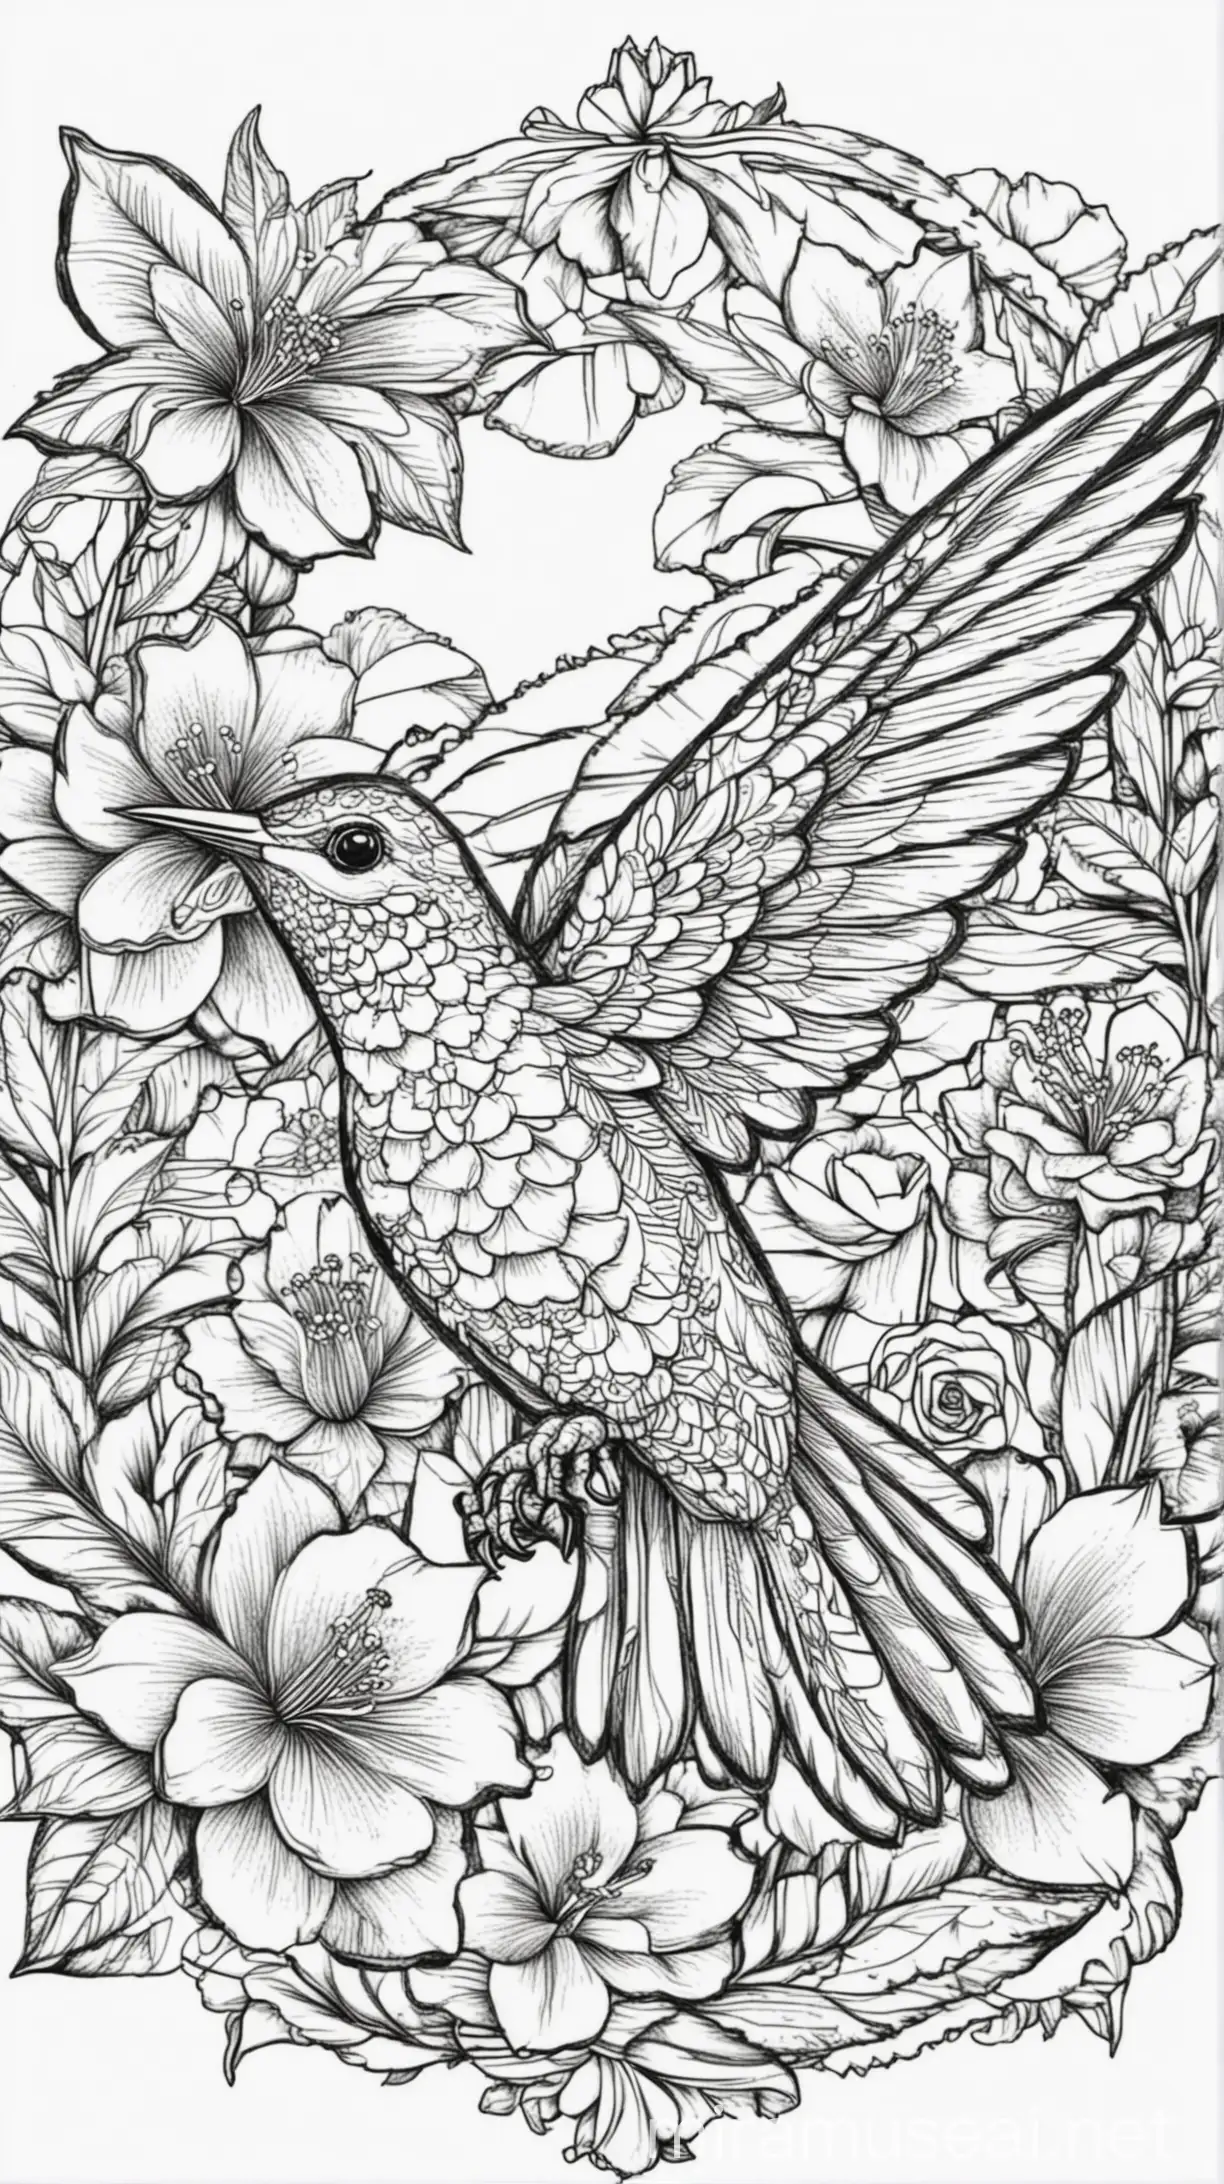 Hummingbird with Roses for Coloring Book